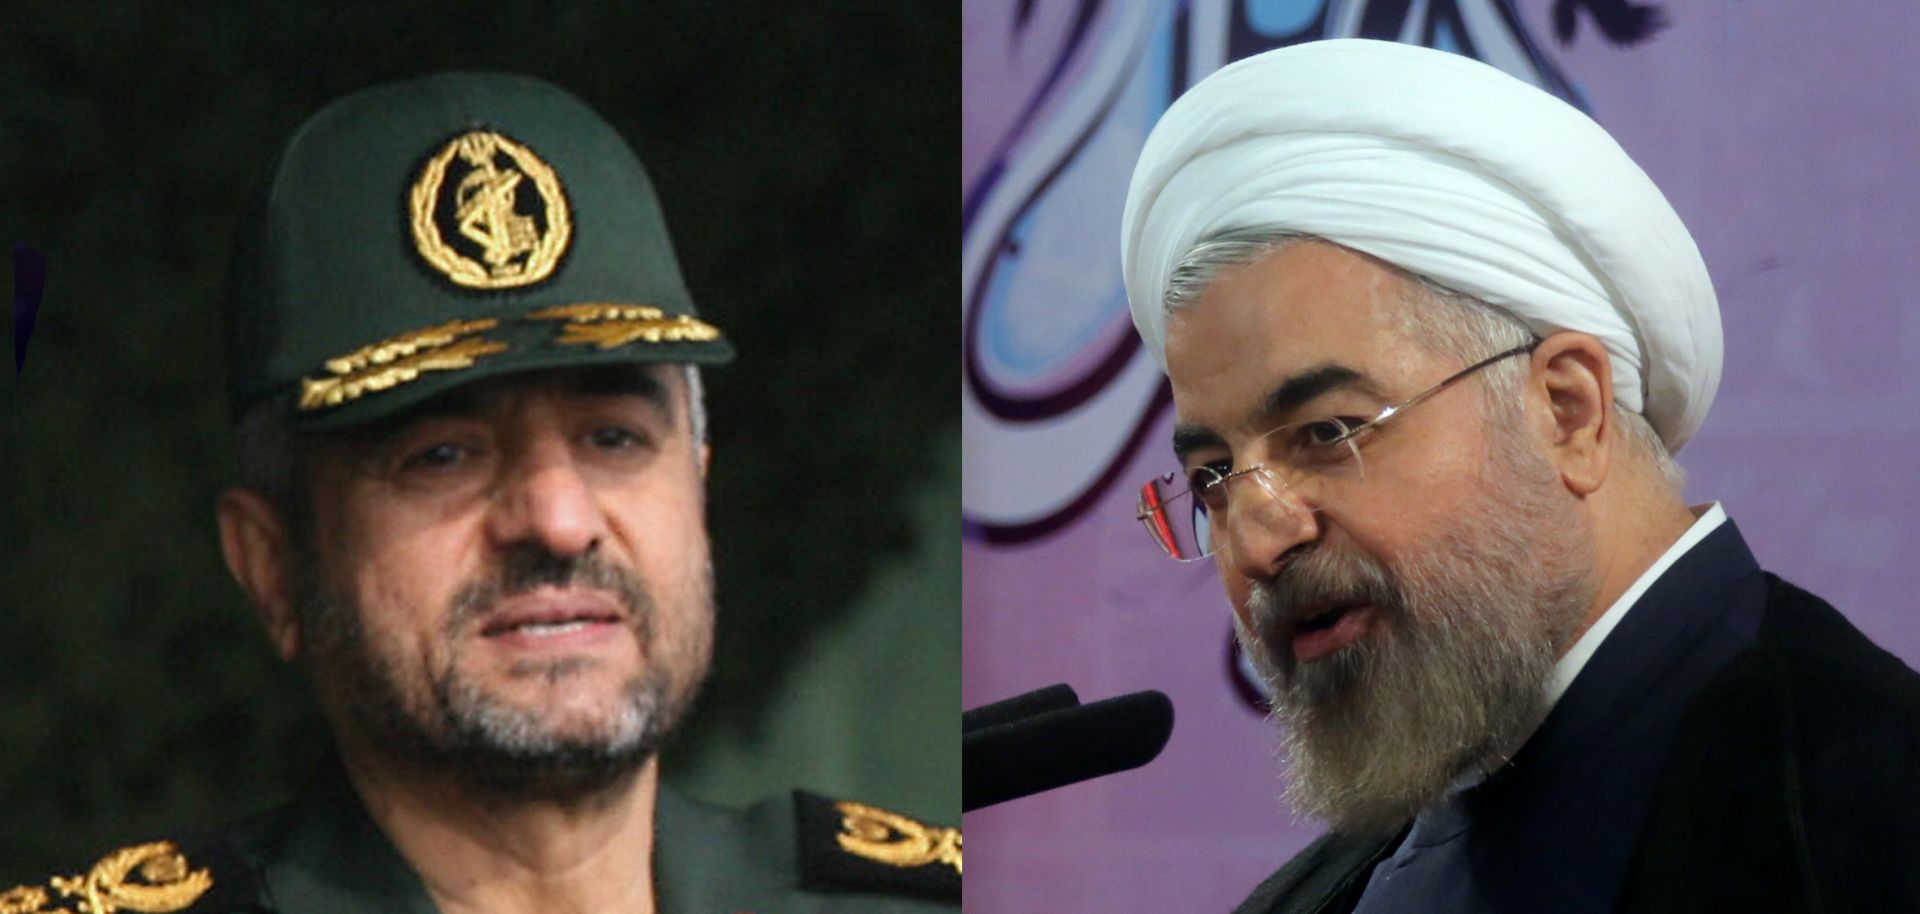 (L) Head of Iran's elite Islamic Revolutionary Guard Corps, Gen. Mohammad Ali Jafari, appears at a gathering in Tehran on Nov. 26, 2007. (R) Iranian President Hassan Rouhani speaks during a press conference in Tehran on June 14, 2014.